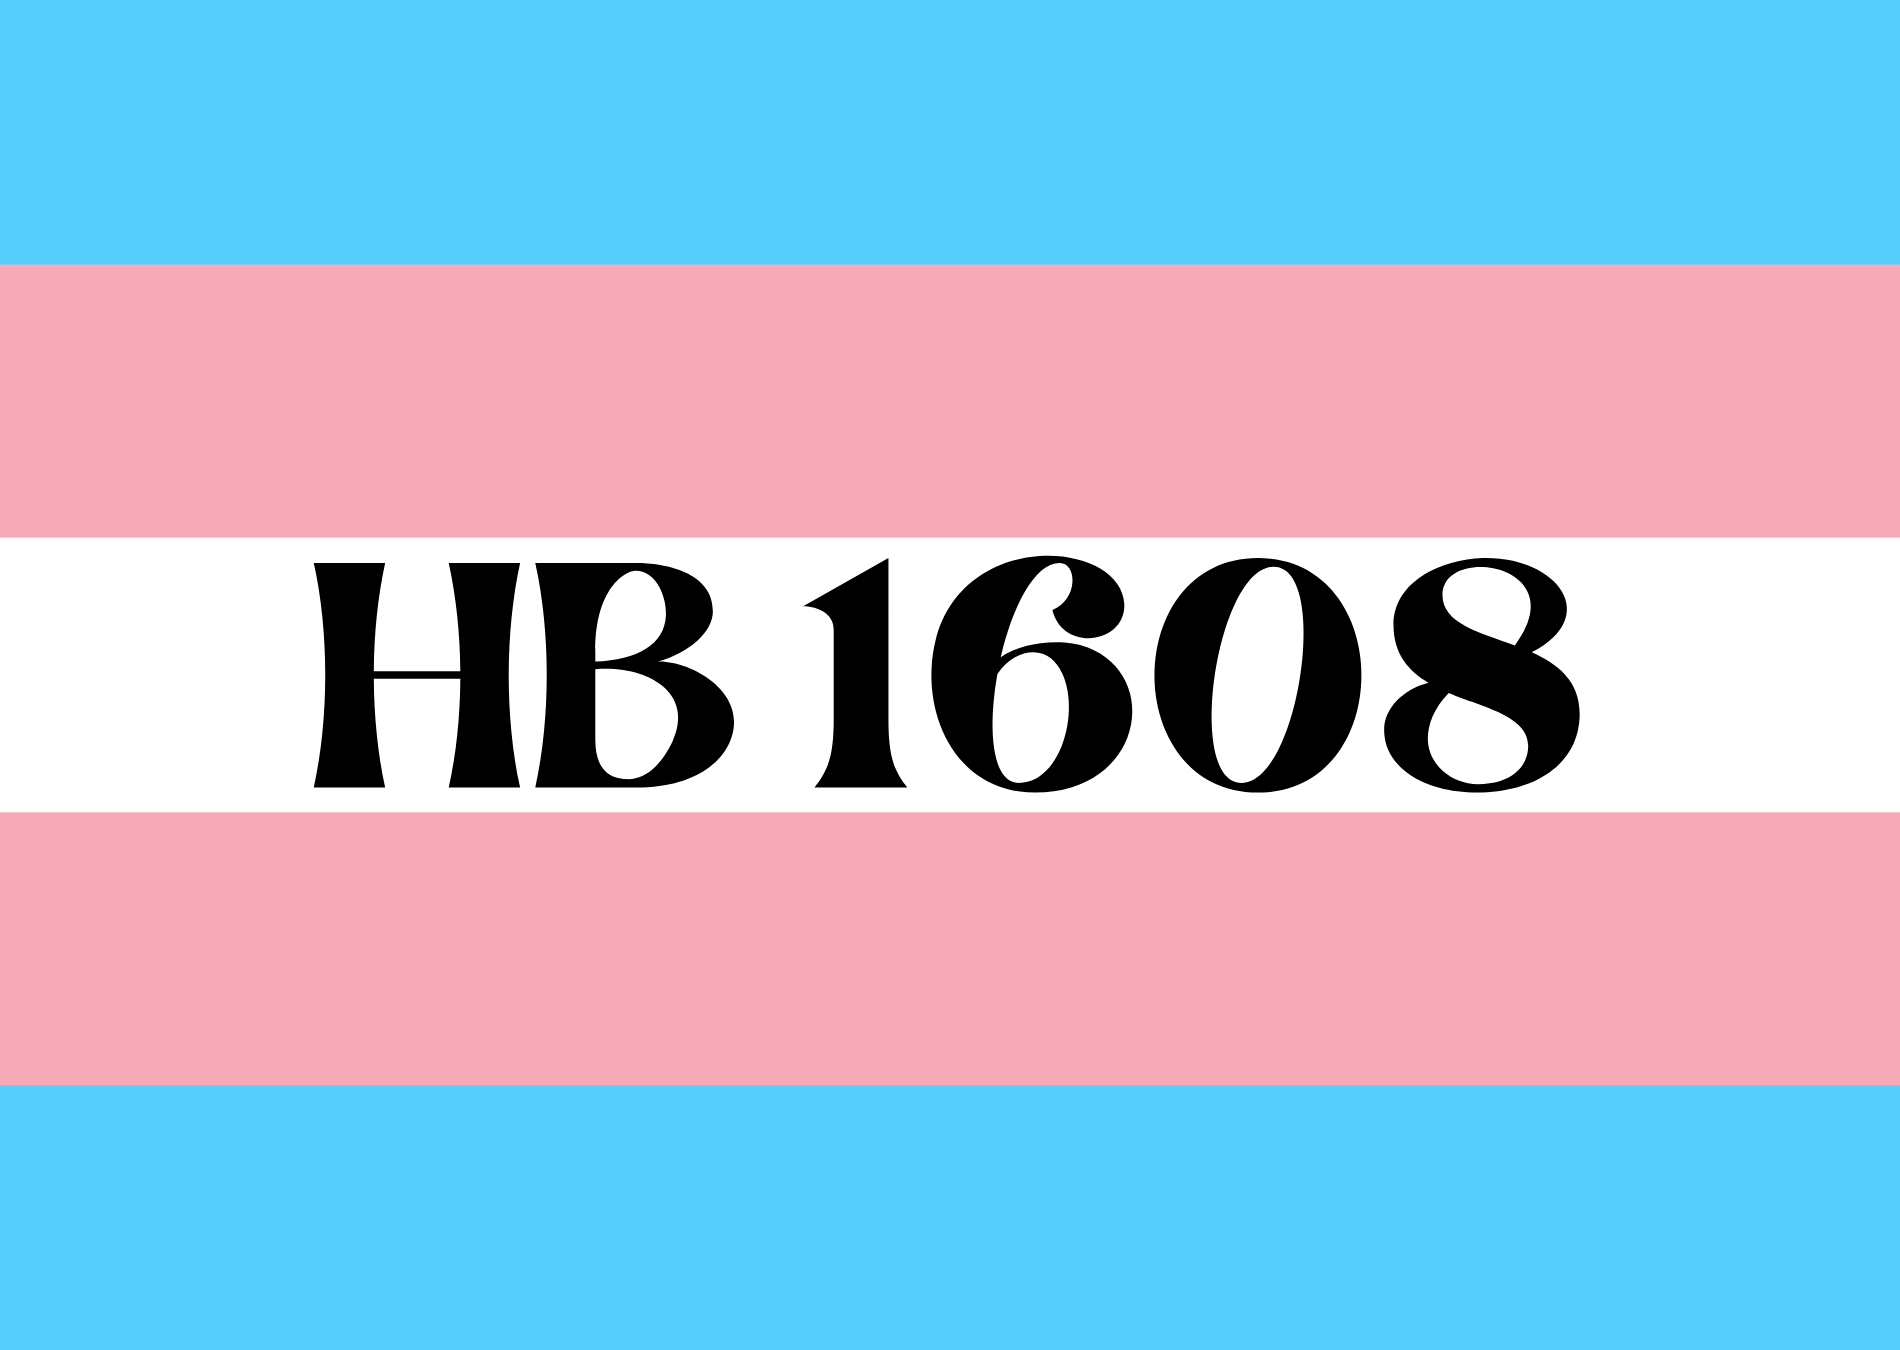 House Bill 1608. Graphic by R.K.O. Pablo.